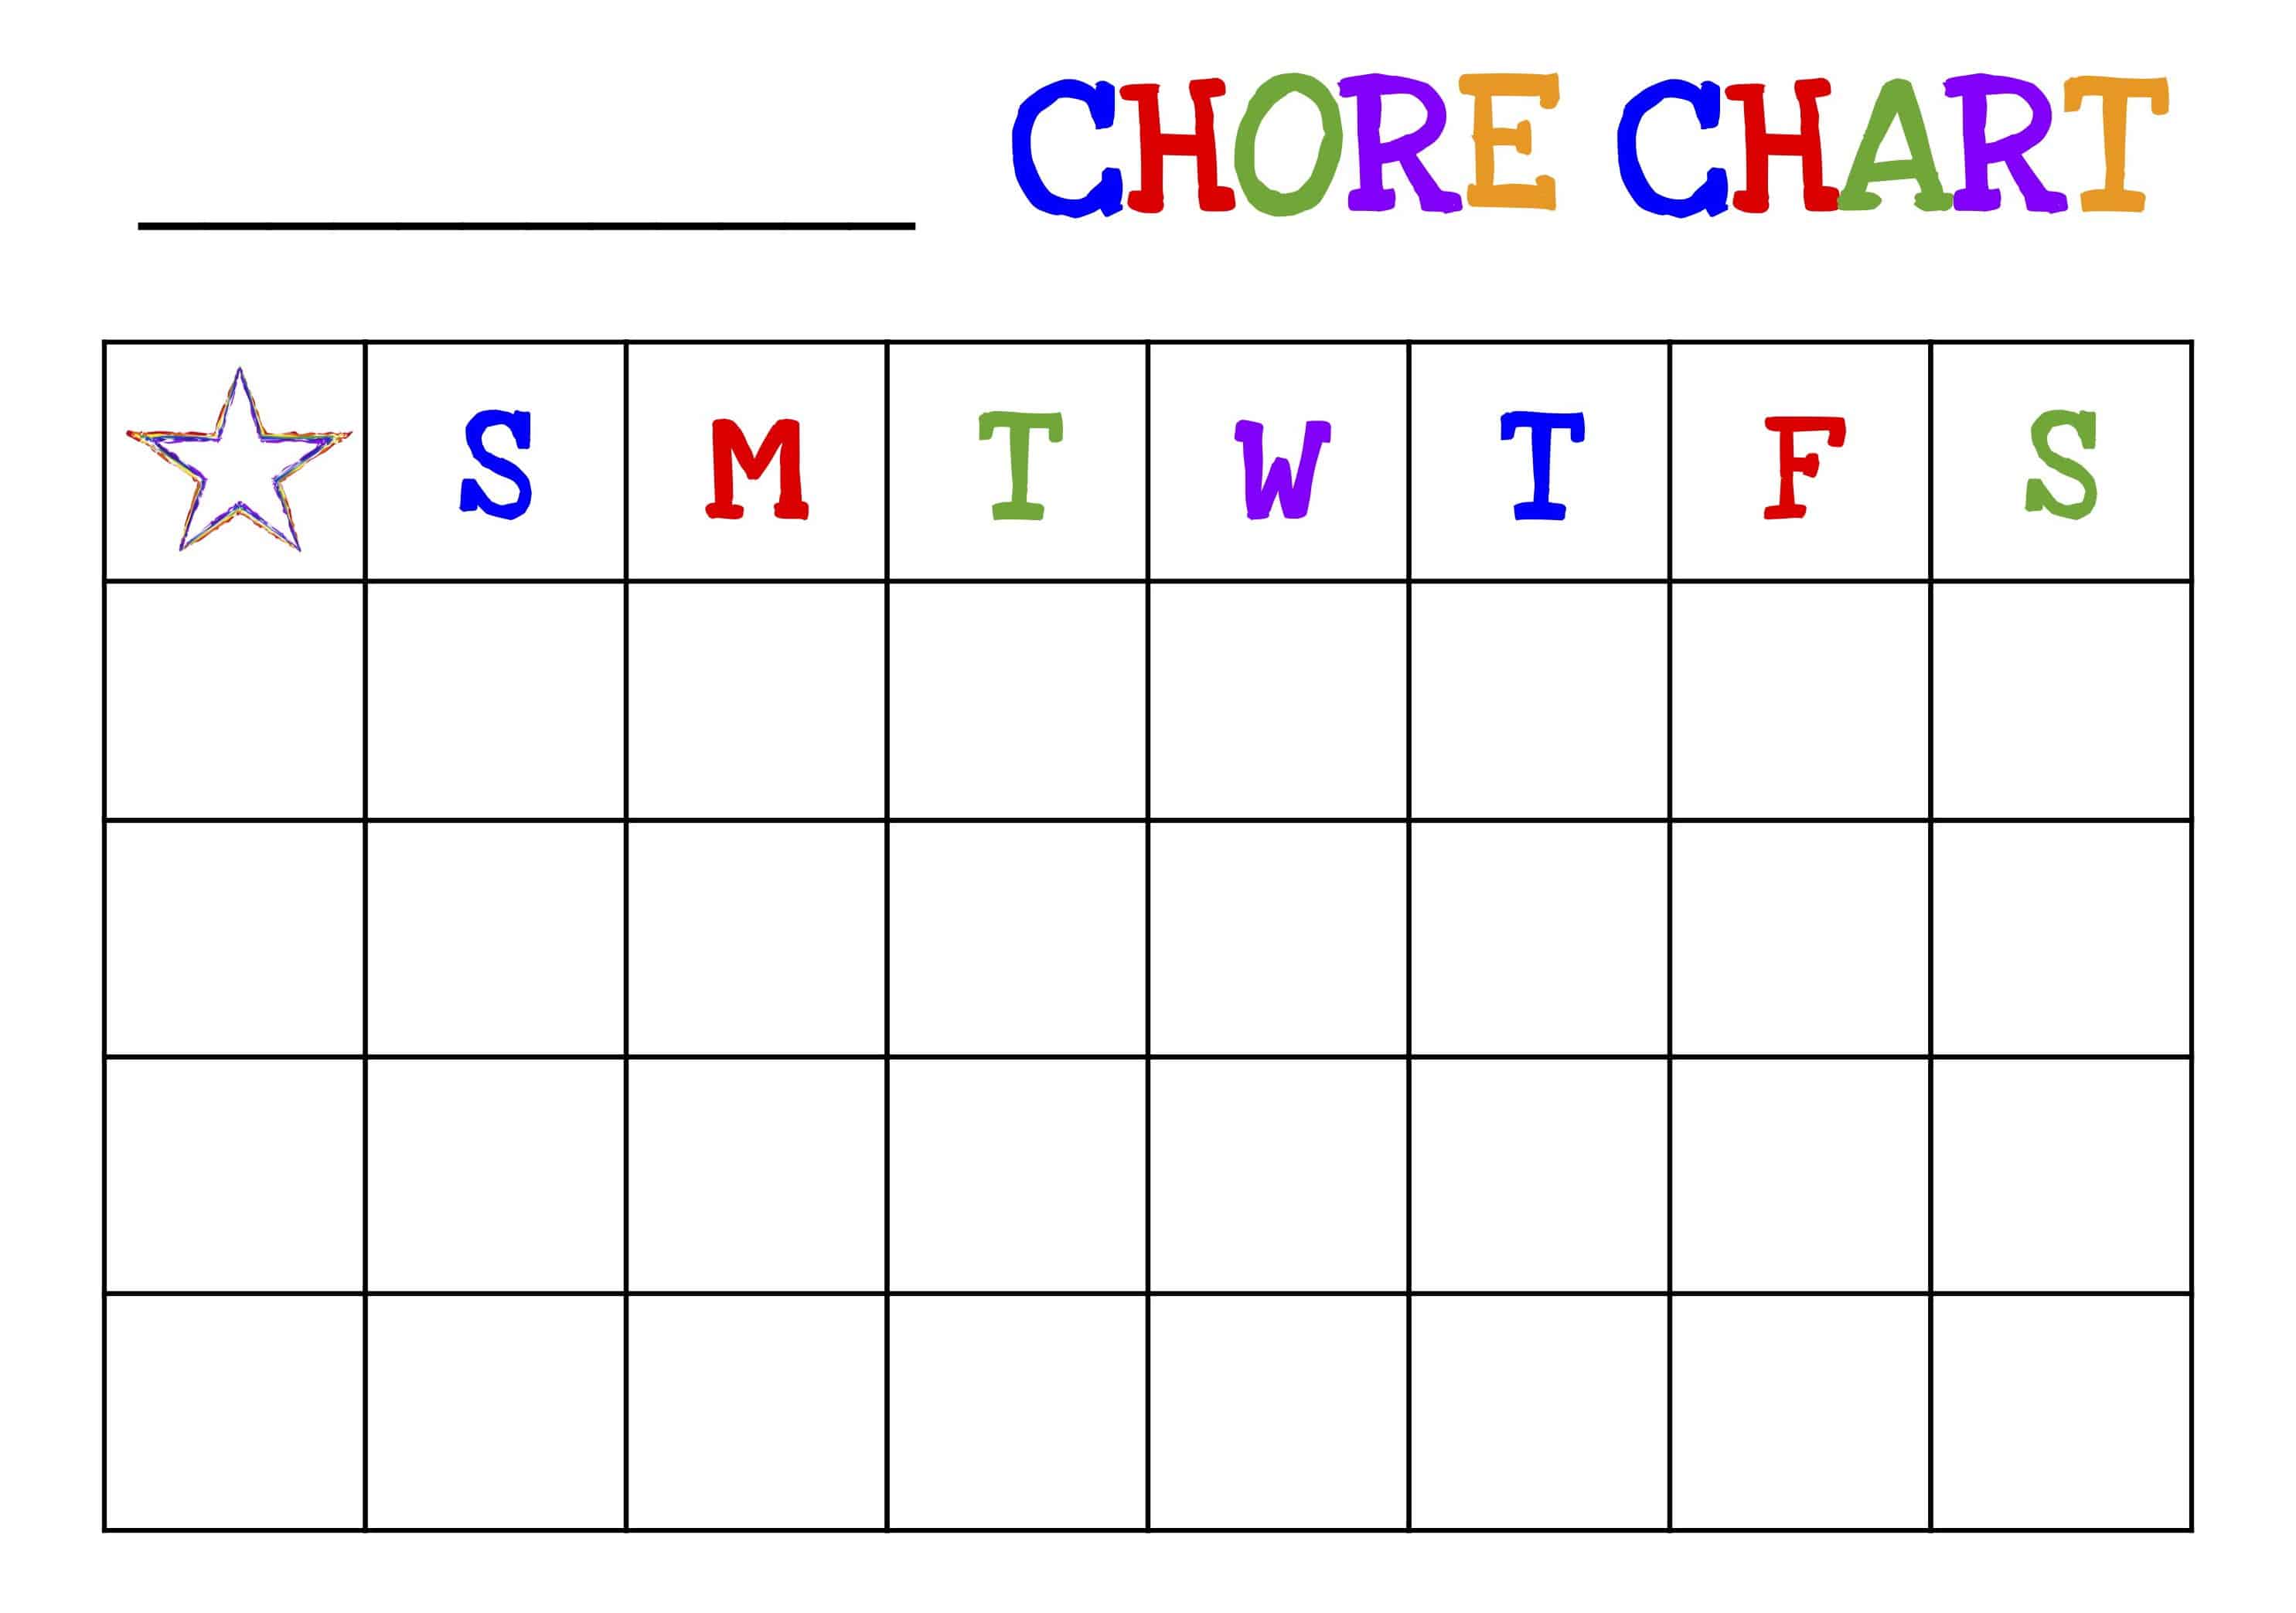 Free Printable Chore Chart For Kids - Motivate your child with this easy tool and always be sure to reward with a sweet treat! #KempsLocallyCrafted